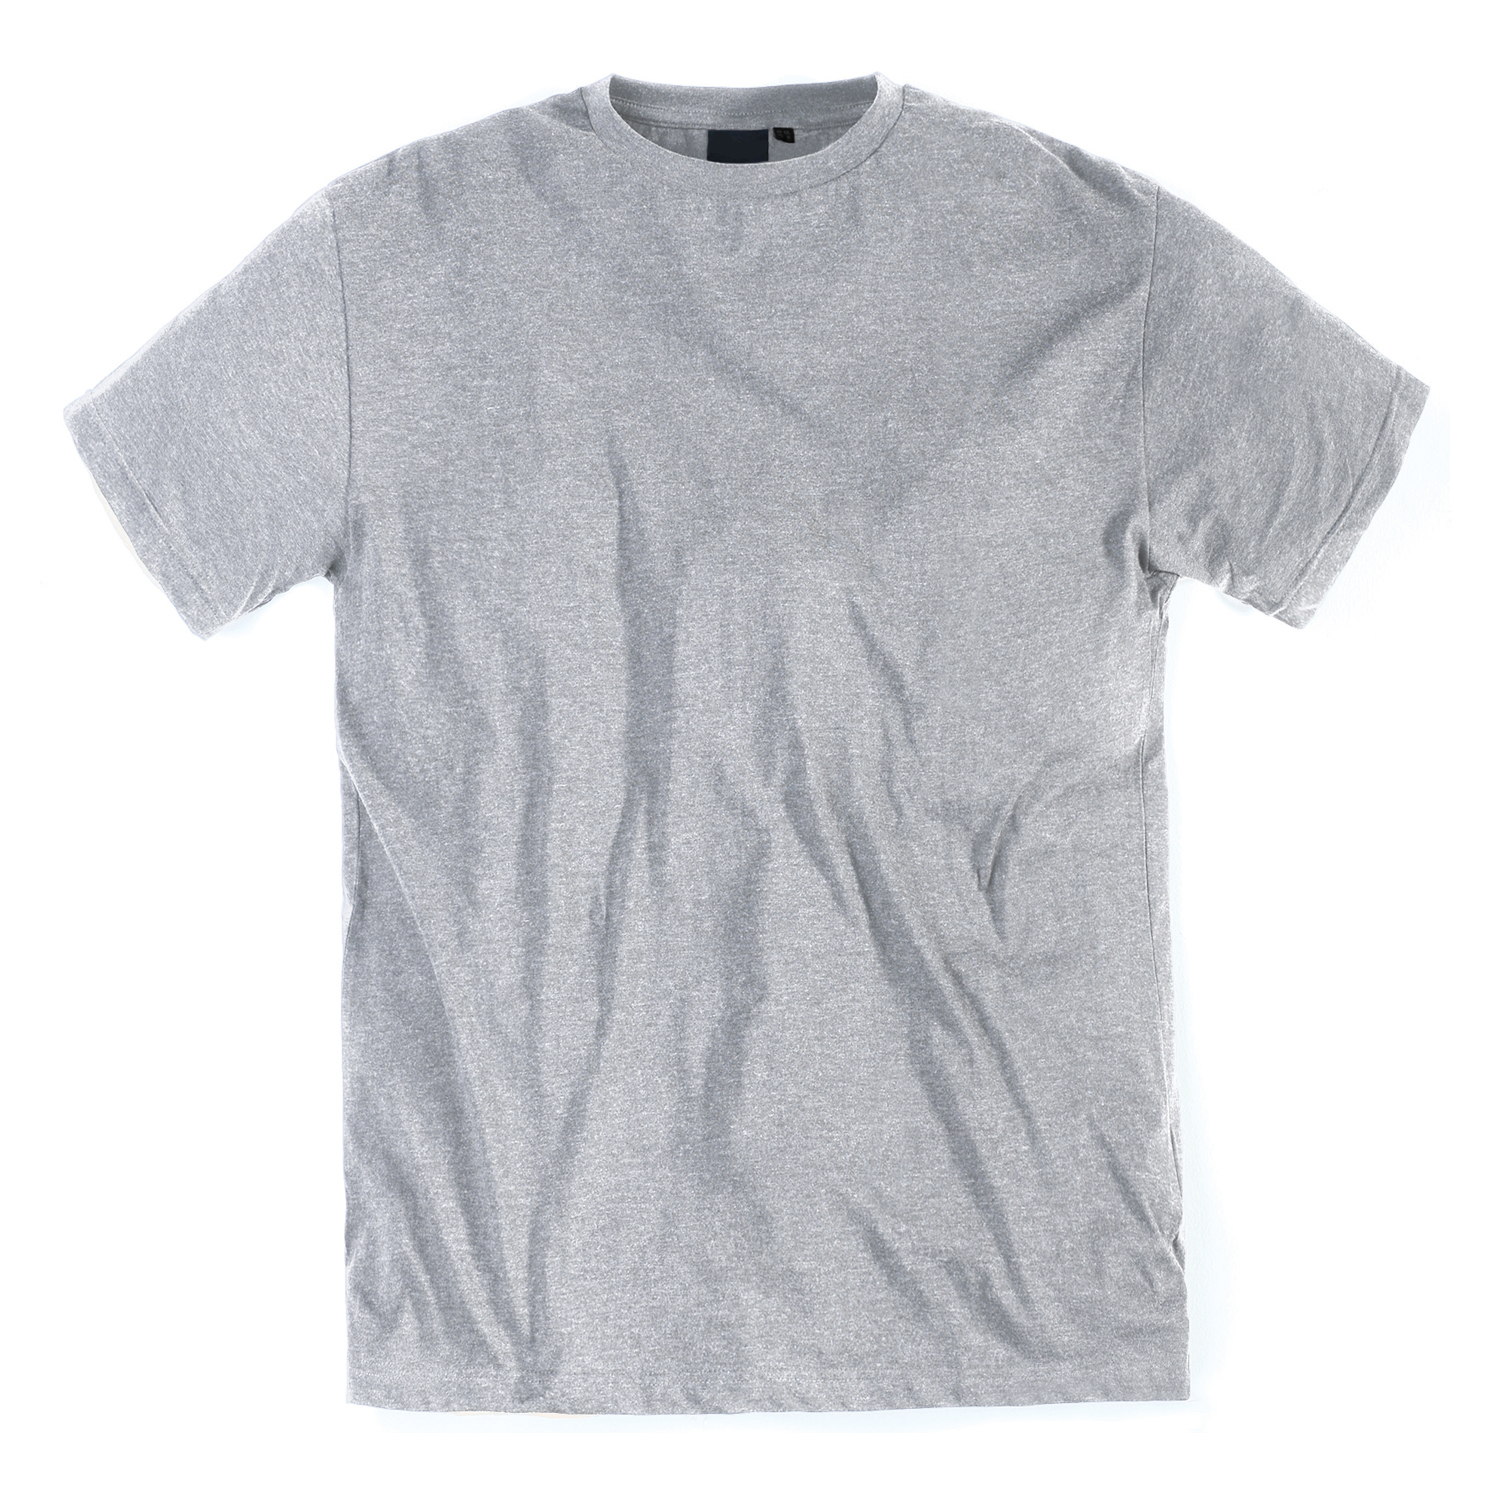 T-Shirt in grey melange by Replika in oversizes up to 8XL // double pack